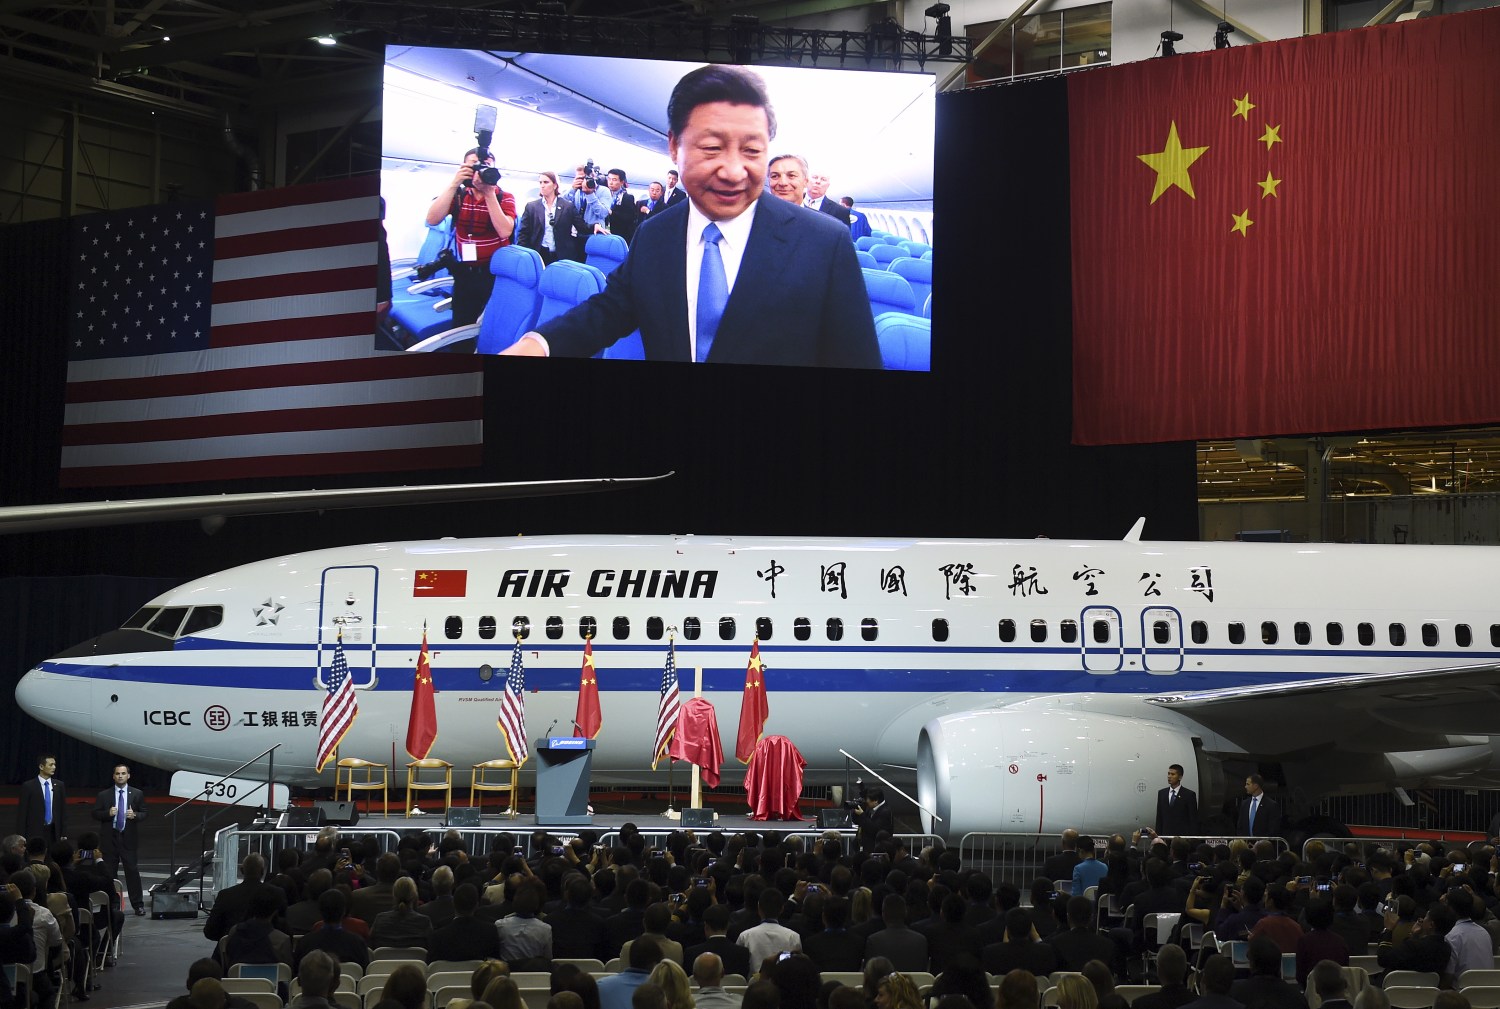 Chinese President Xi Jinping is pictured on a giant screen as he tours a 737-800 jet at the Boeing assembly line in Everett, Washington September 23, 2015. REUTERS/Mark Ralston/Pool  - GF10000217732